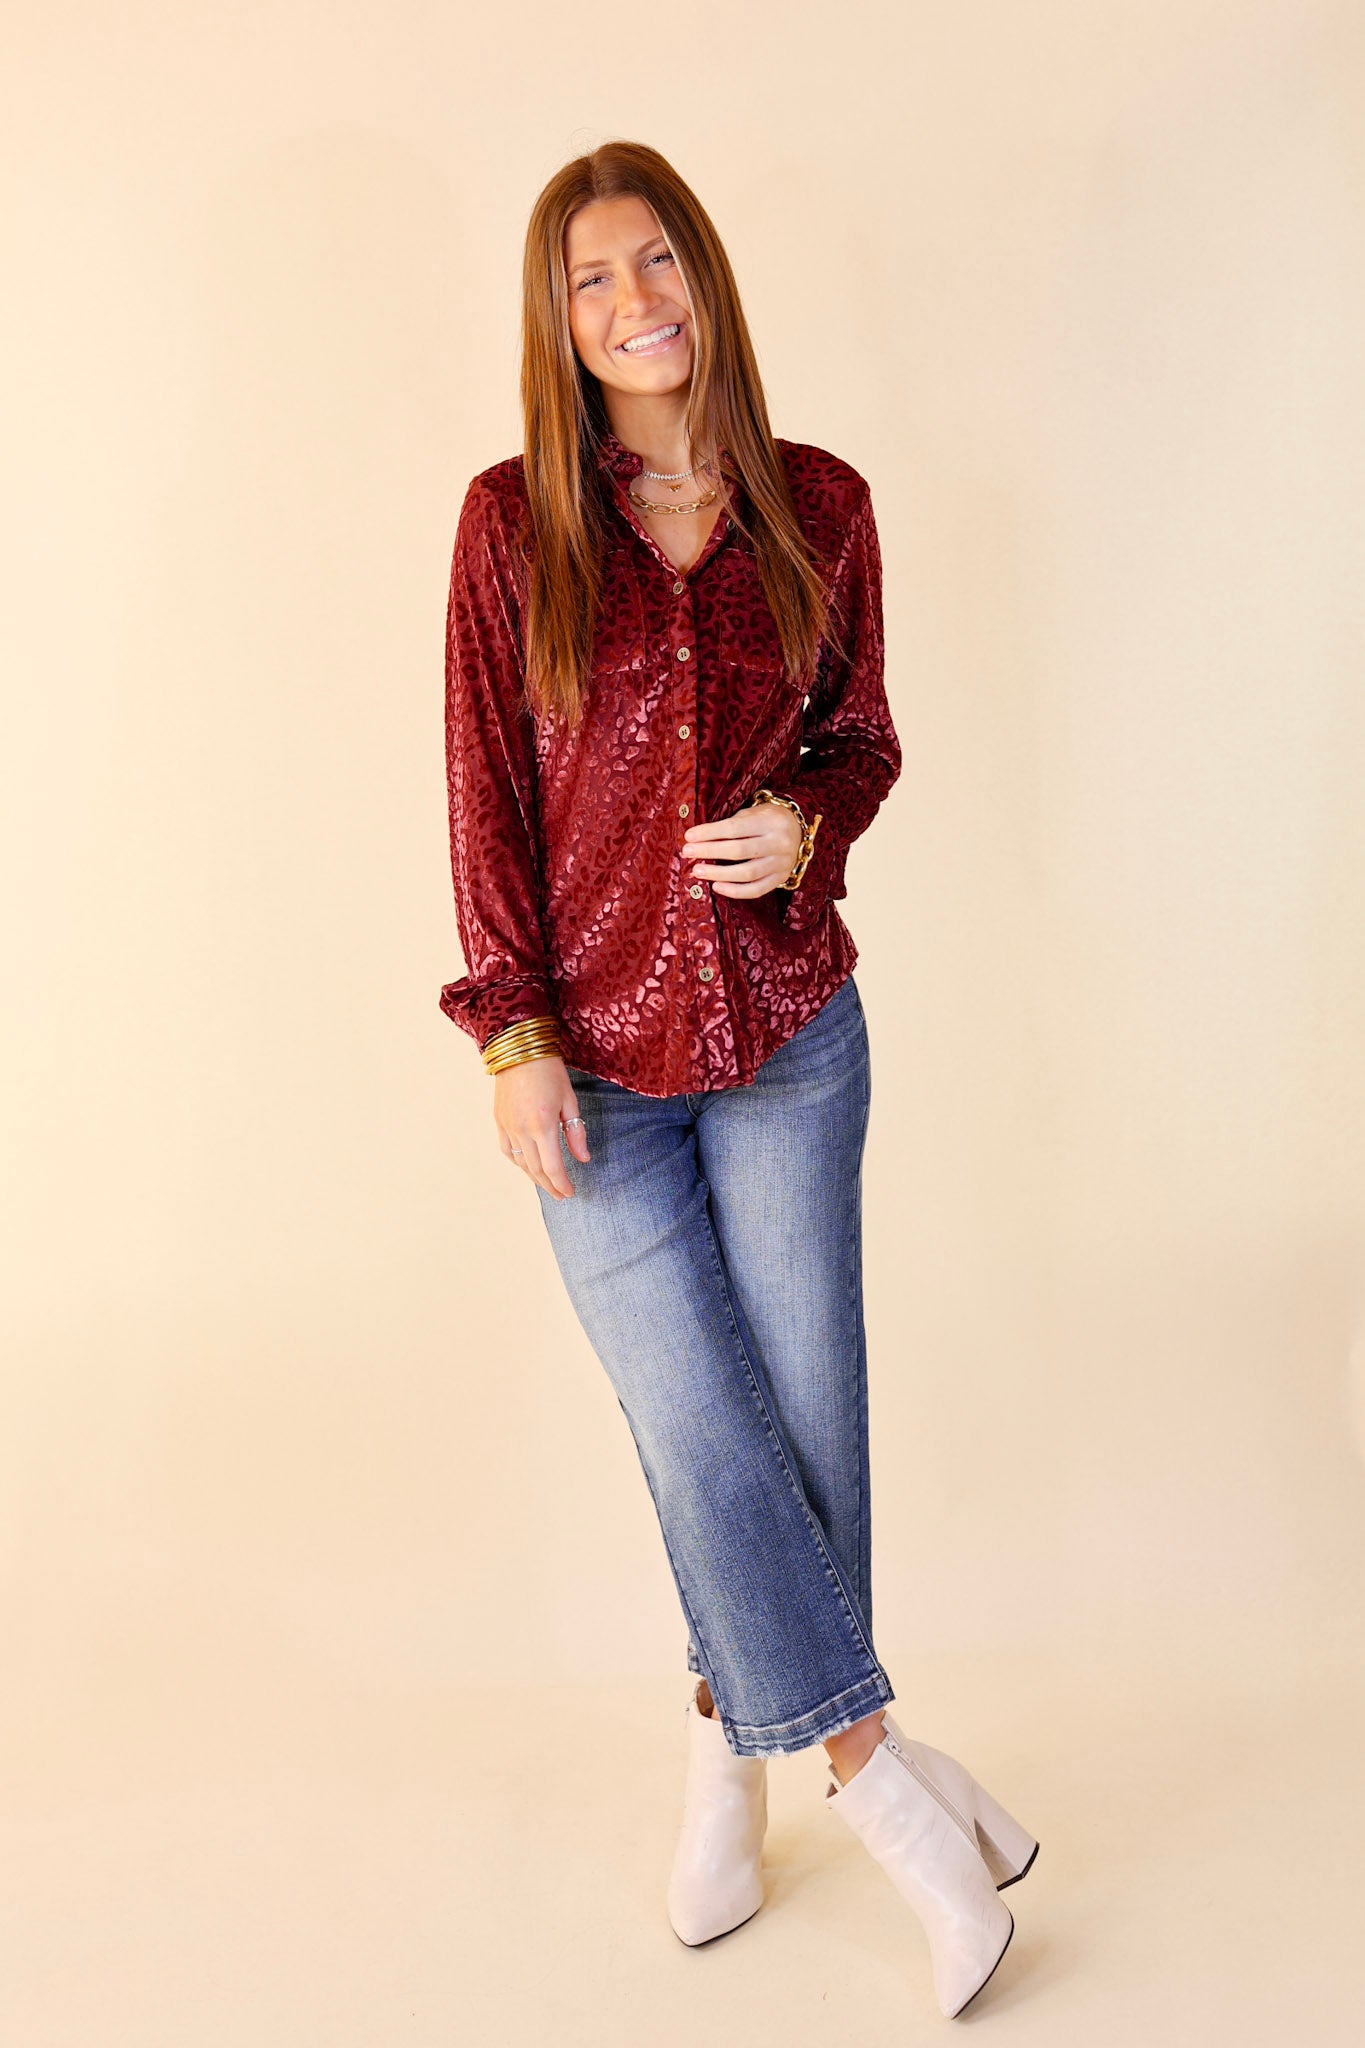 Candy Apple Evening Button Up Animal Print Velvet Long Sleeve Blouse in Wine Red - Giddy Up Glamour Boutique